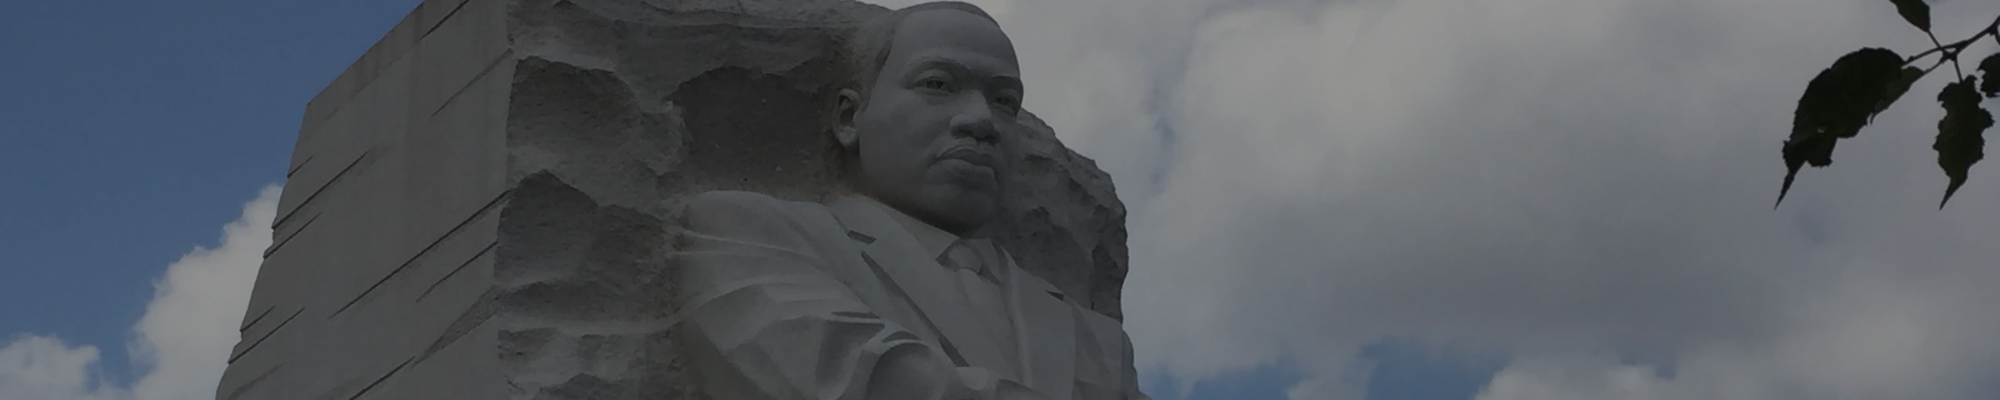 Image of a statue of MLK JR with a tree on one side and clouds in the background.